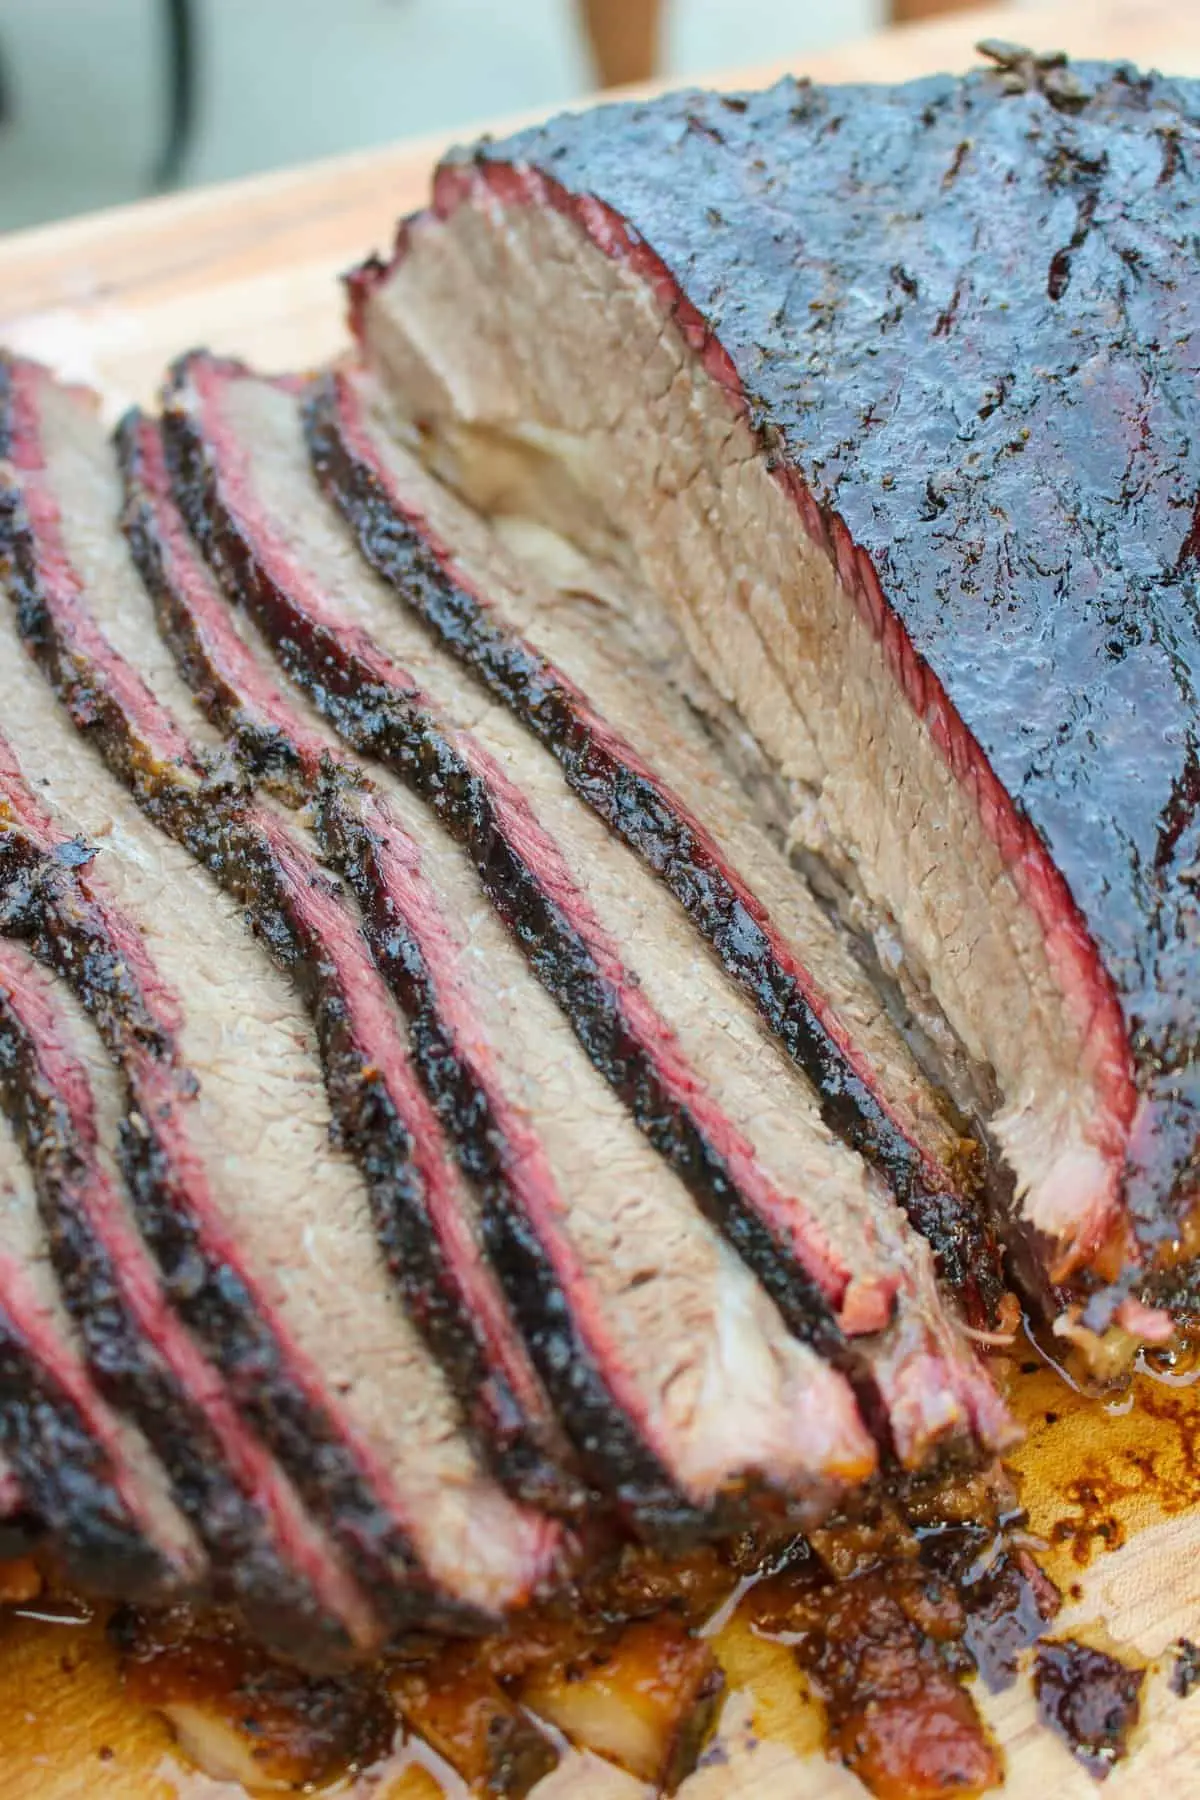 smoked brisket tough - Does brisket get tough if overcooked